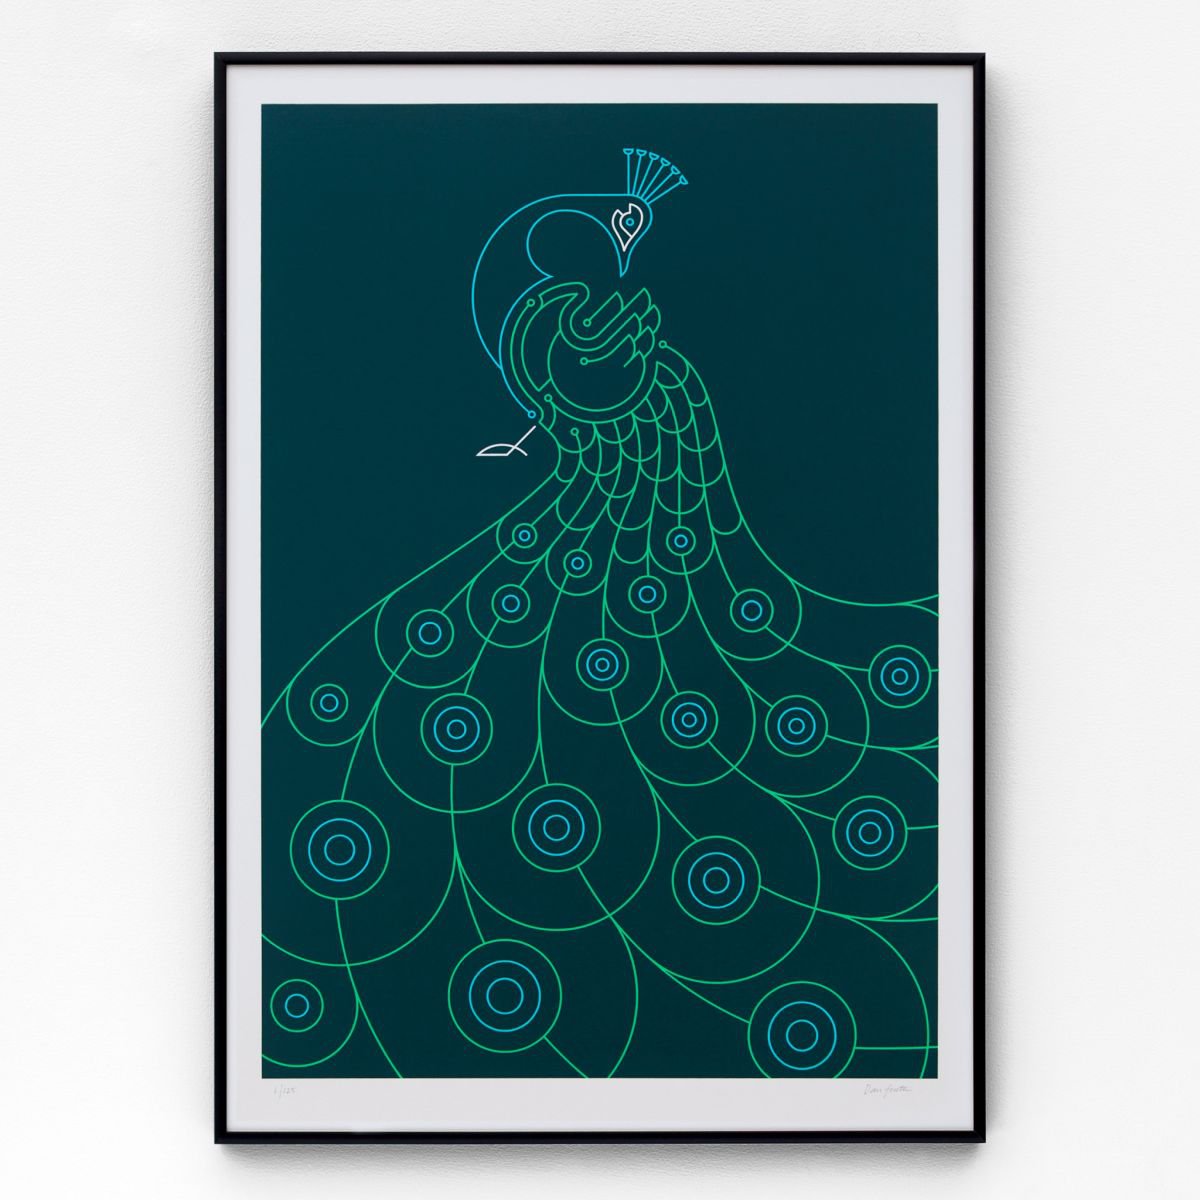 Peacock A2 limited edition screen print by The Lost Fox